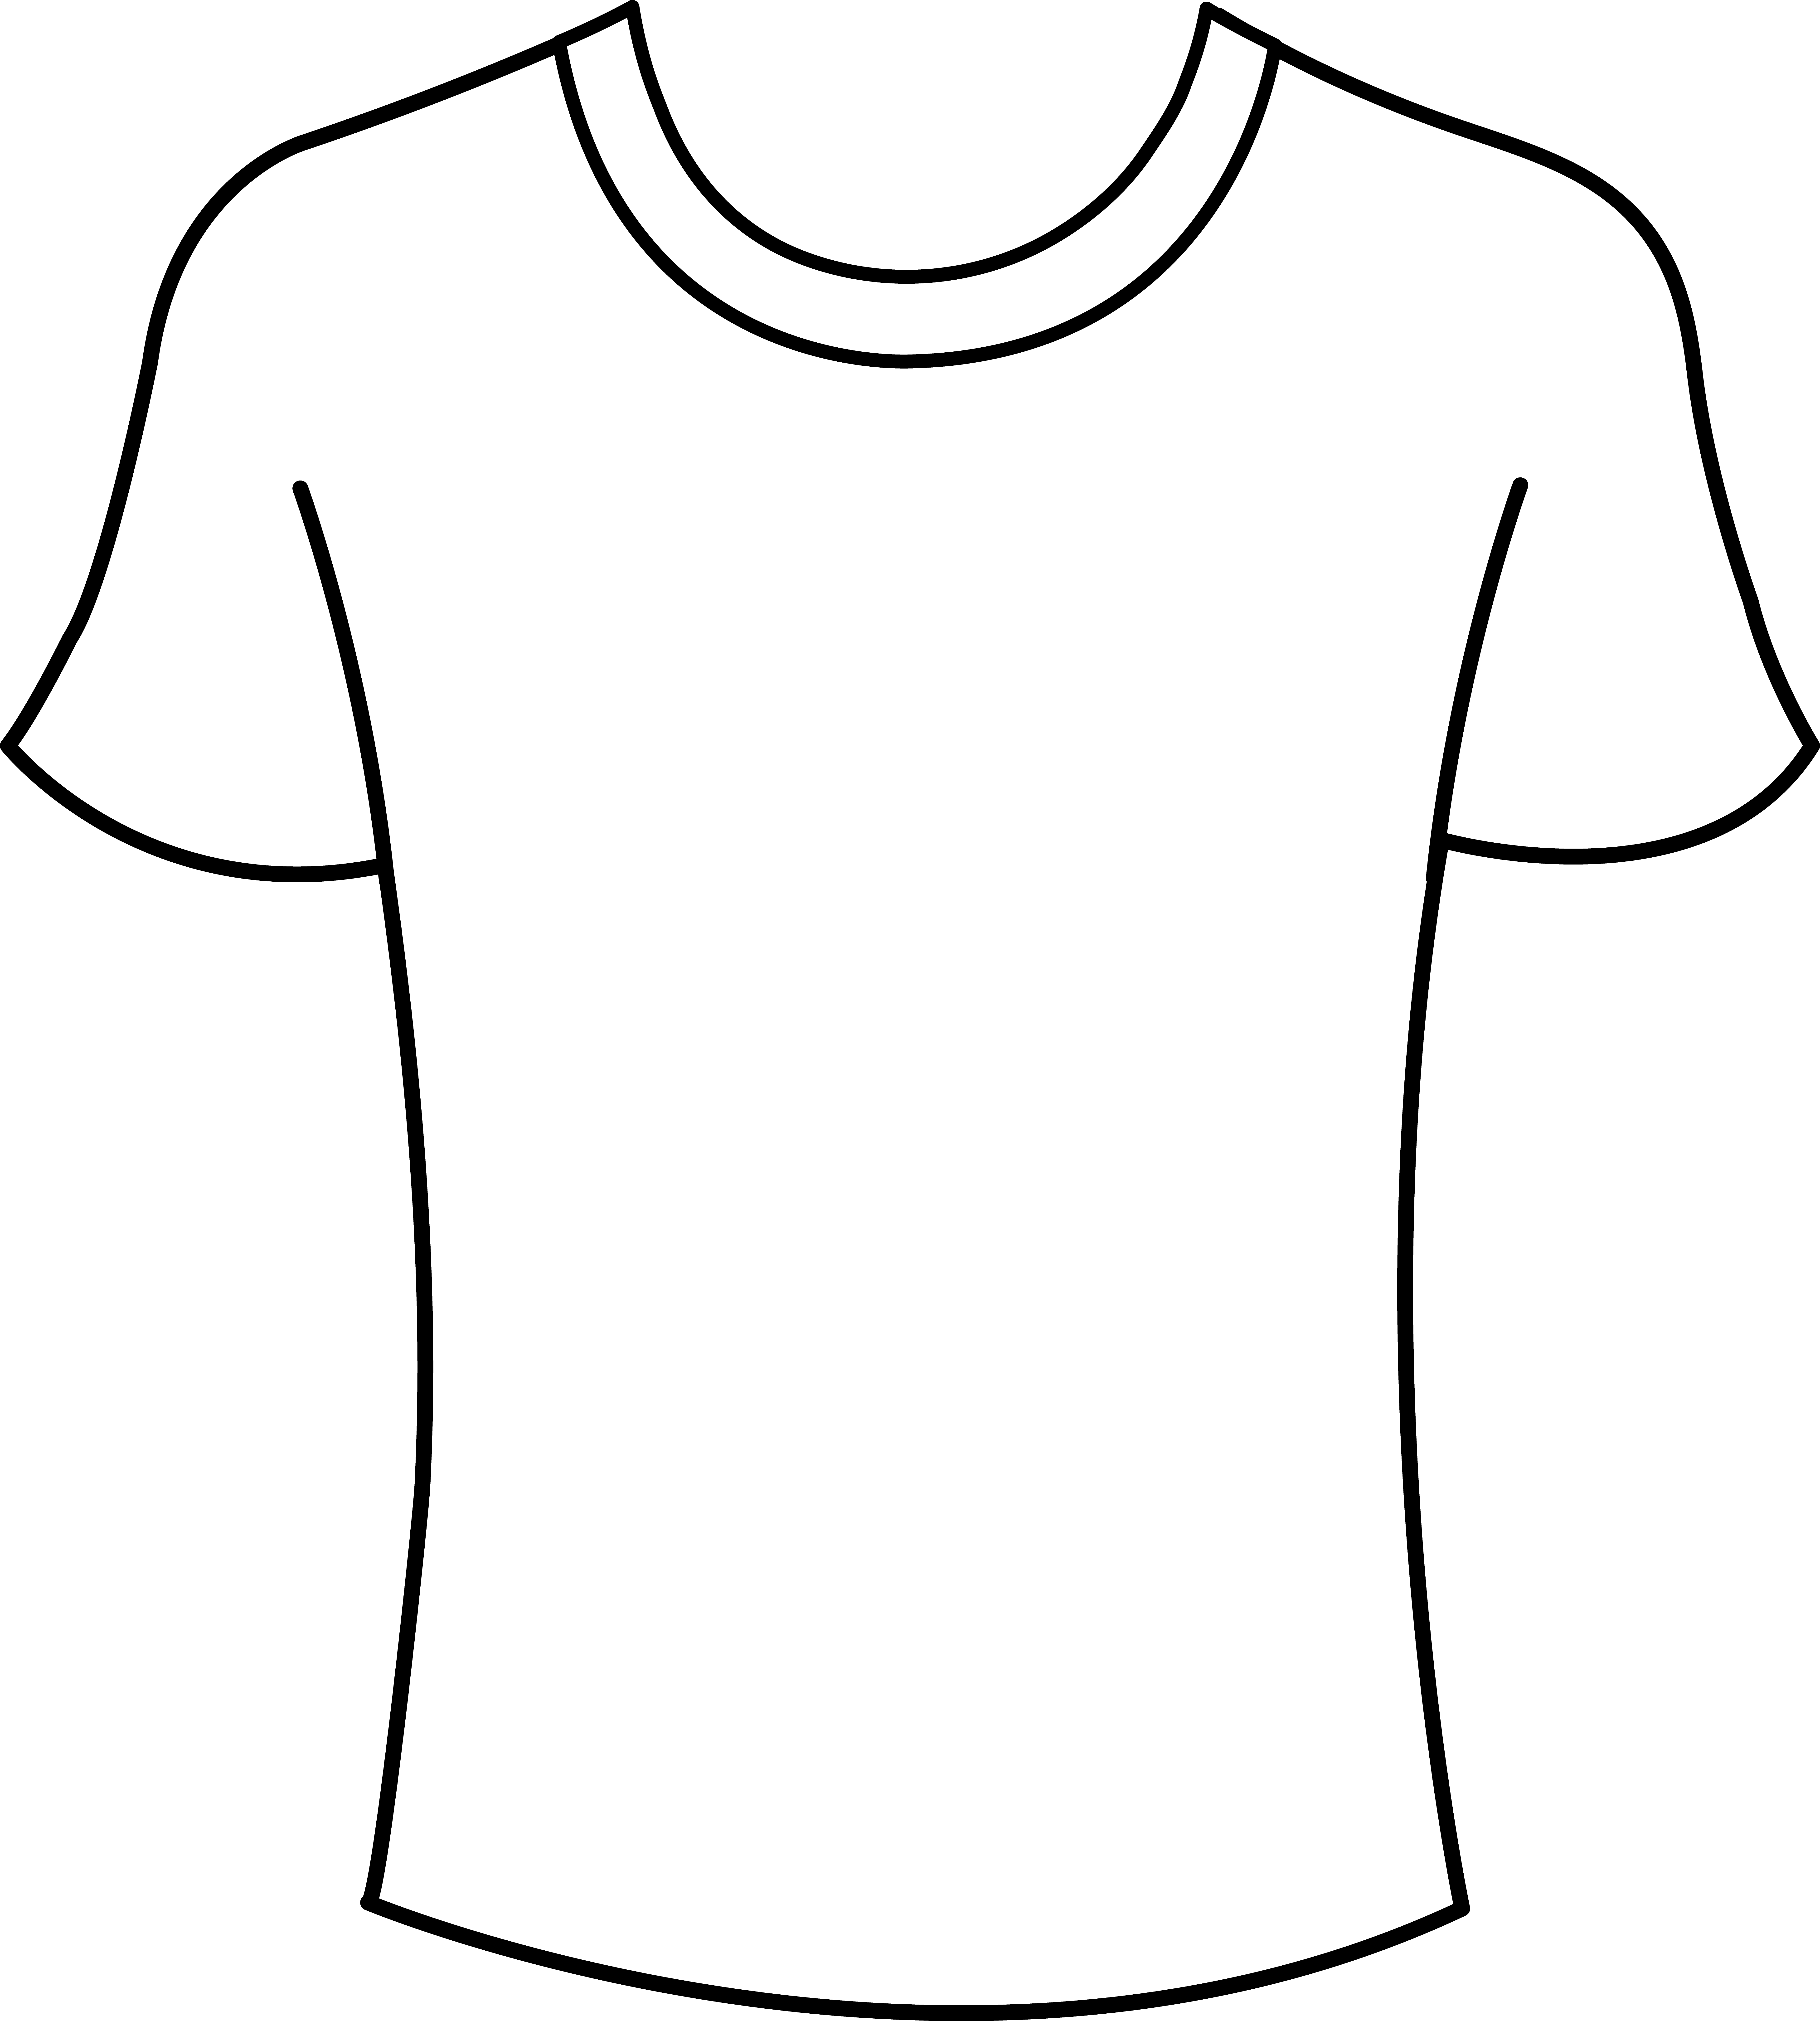 T Shirt Outline Vector Cliparts.co